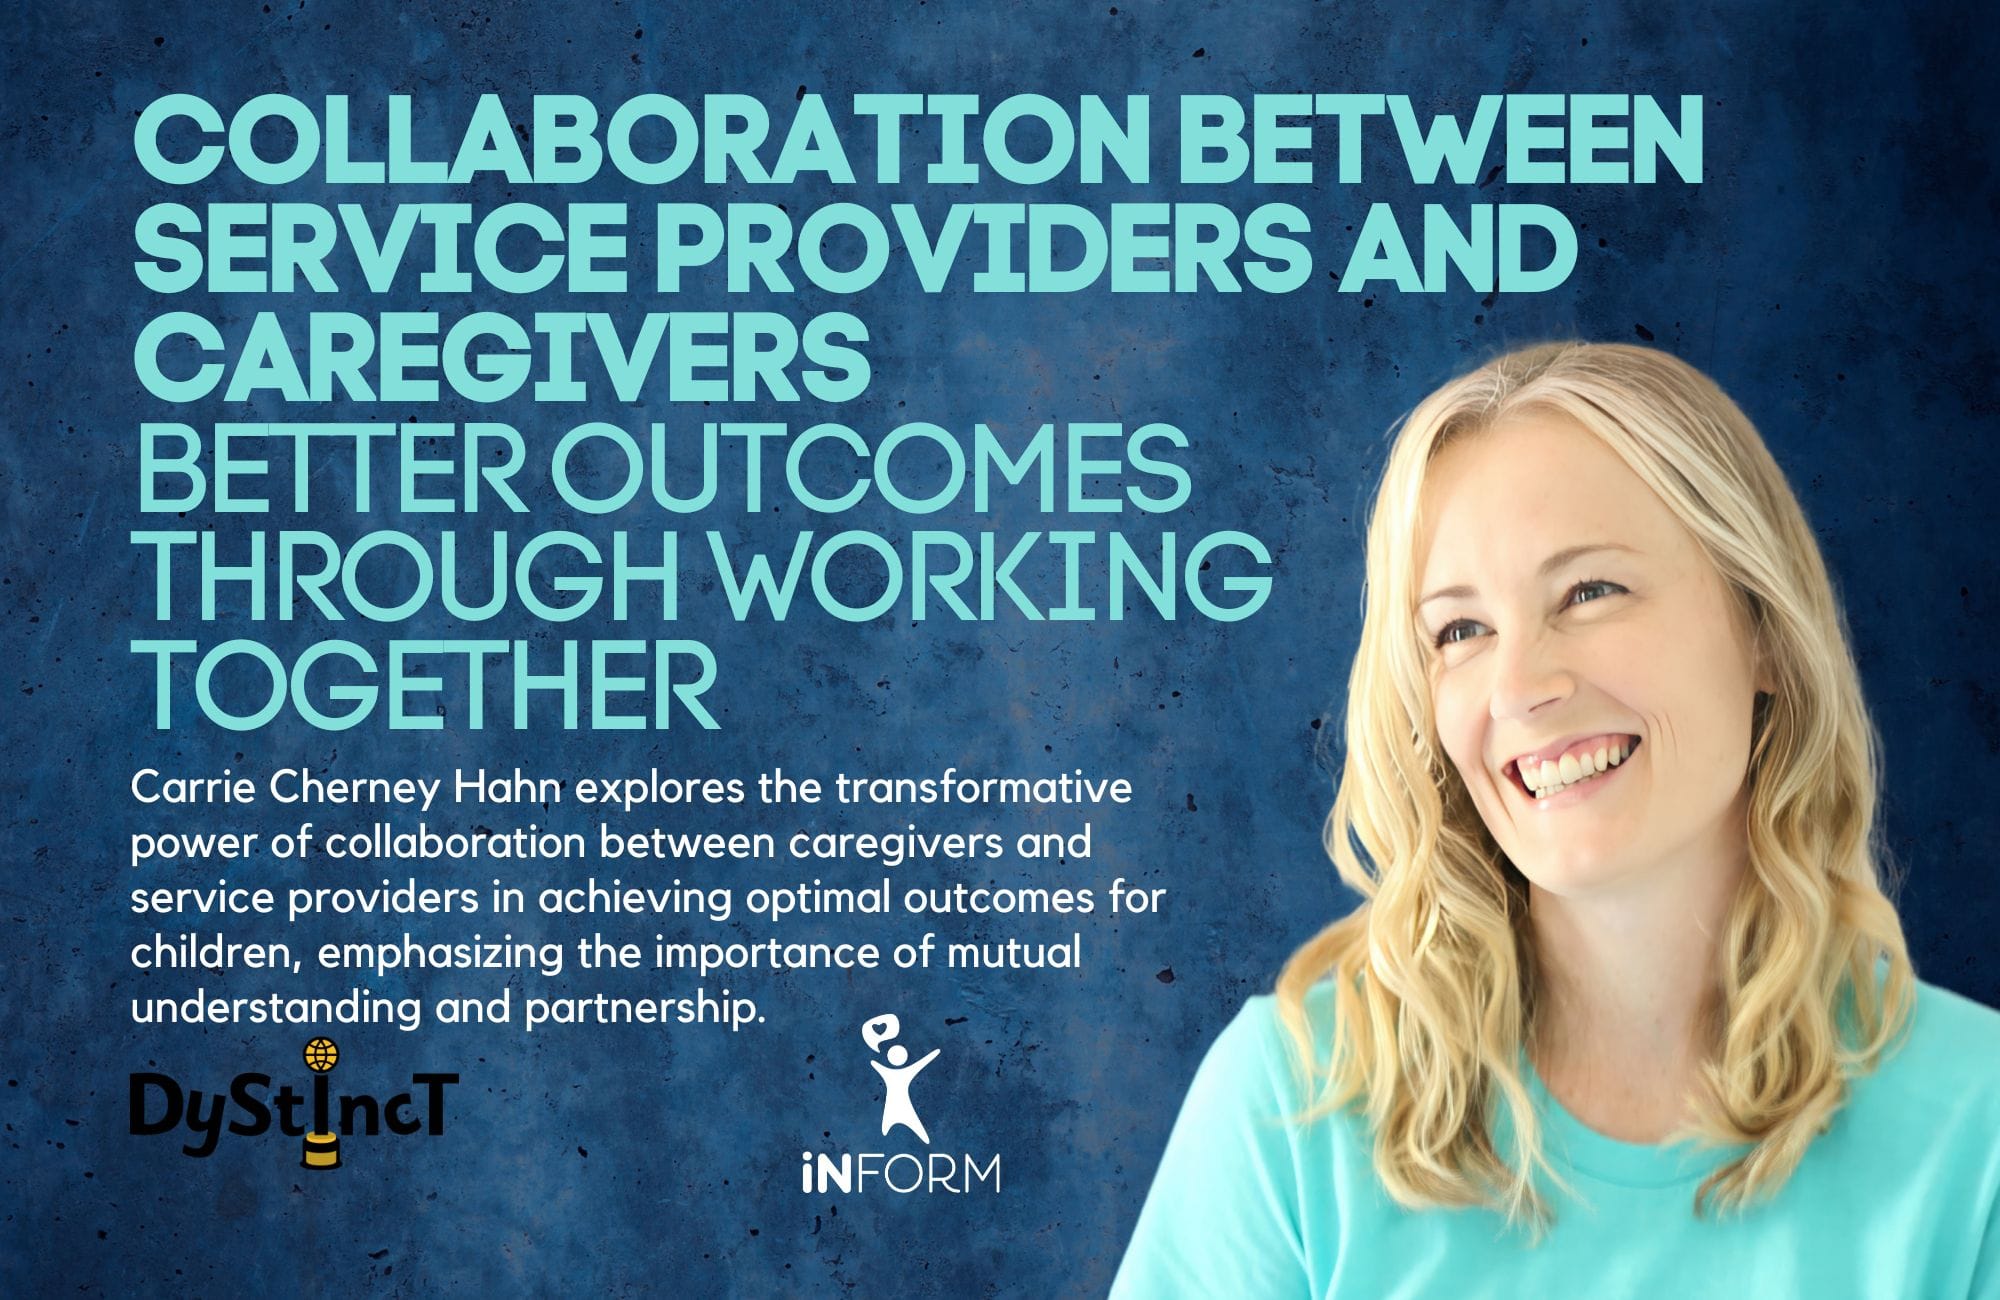 Issue 20: Collaboration Between Service Providers and Caregivers: Better Outcomes through Working Together | Carrie Cherney Hahn